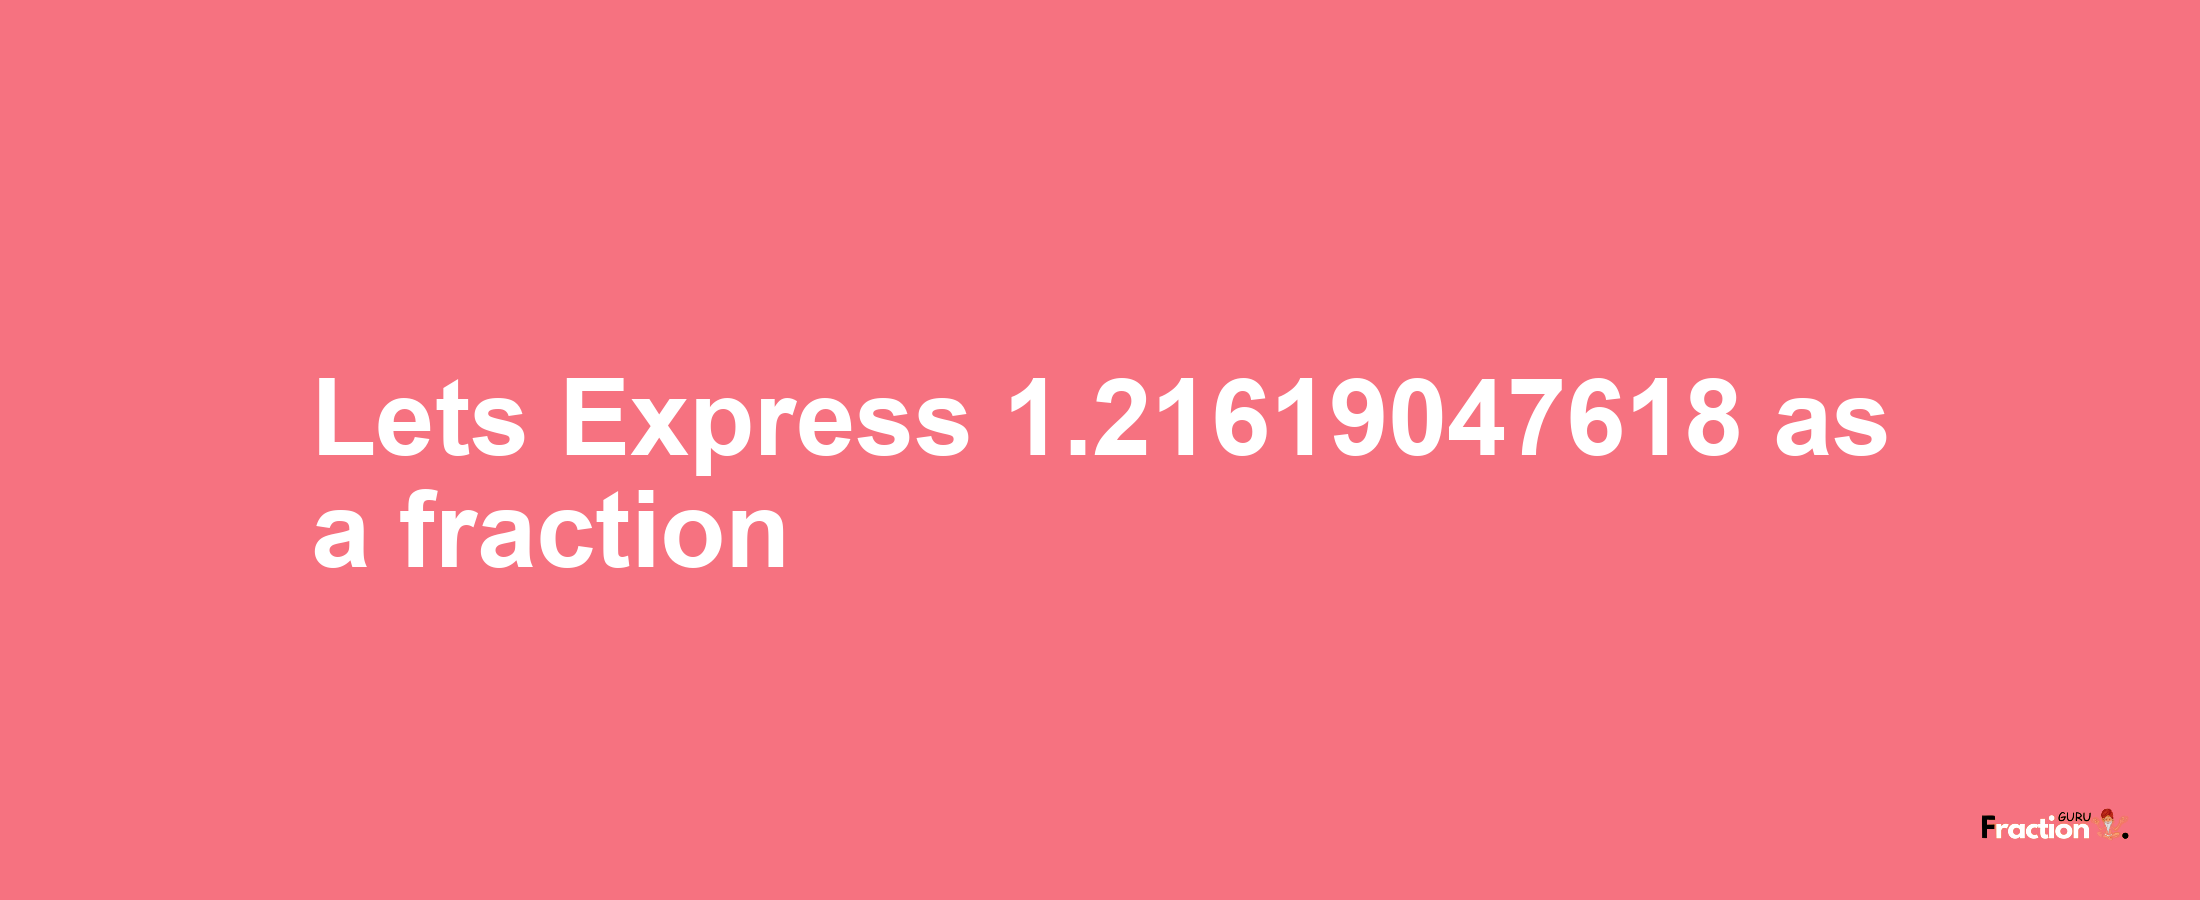 Lets Express 1.21619047618 as afraction